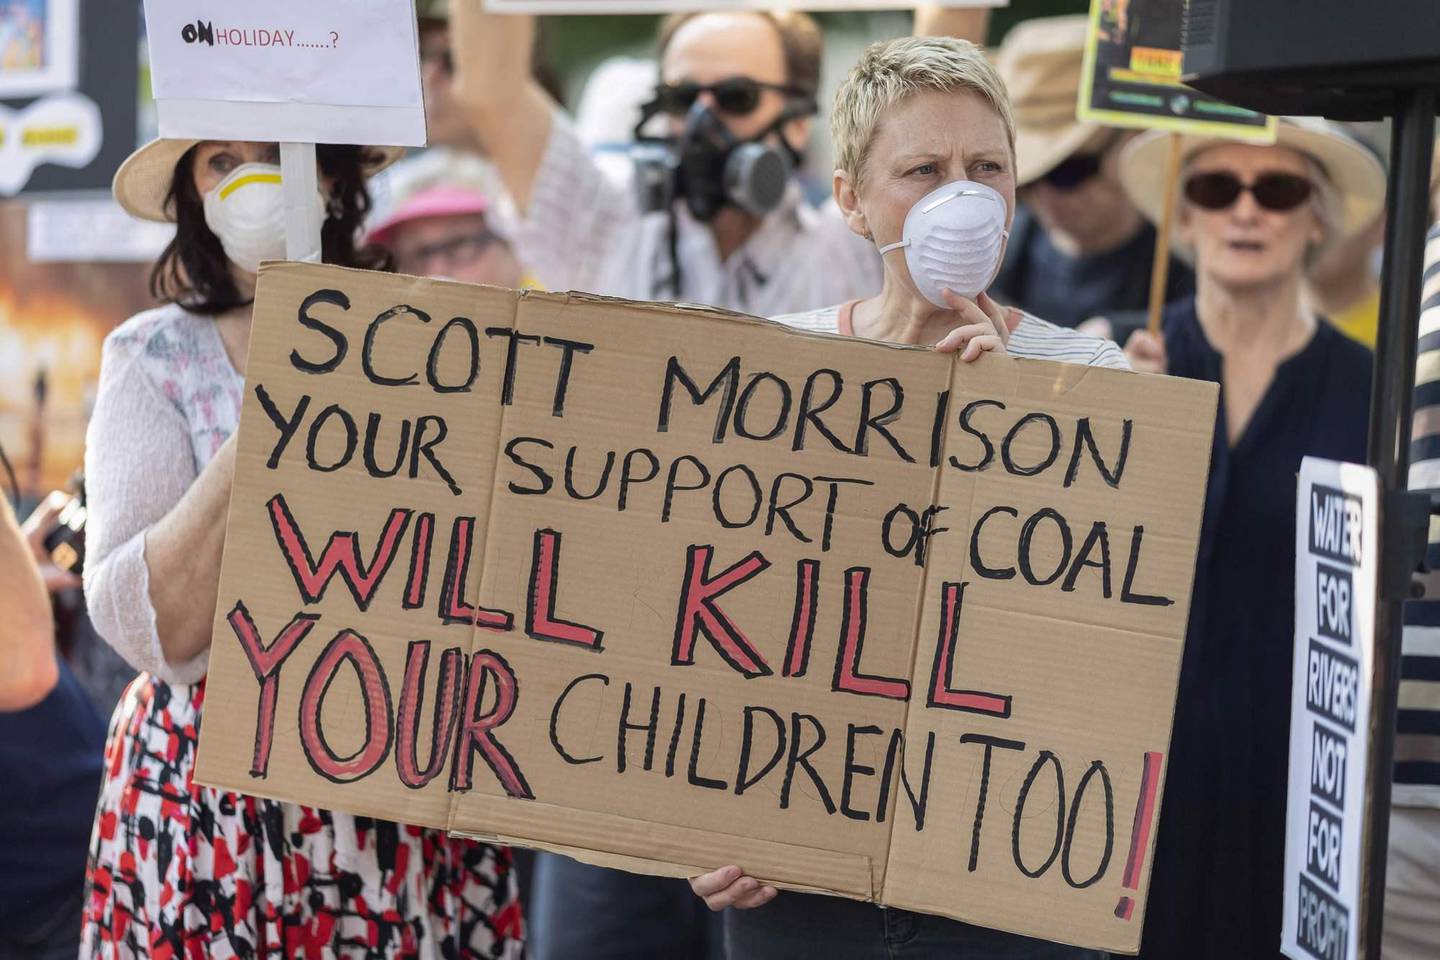 Demonstrators attend a climate protest in Sydney on December 19, 2019. - Protesters marched on Australian Prime Minister Scott Morrison's official residence in Sydney to demand curbs on greenhouse gas emissions and highlight his absence on an overseas holiday as bushfires burned across the region. (Photo by Wendell TEODORO / AFP)